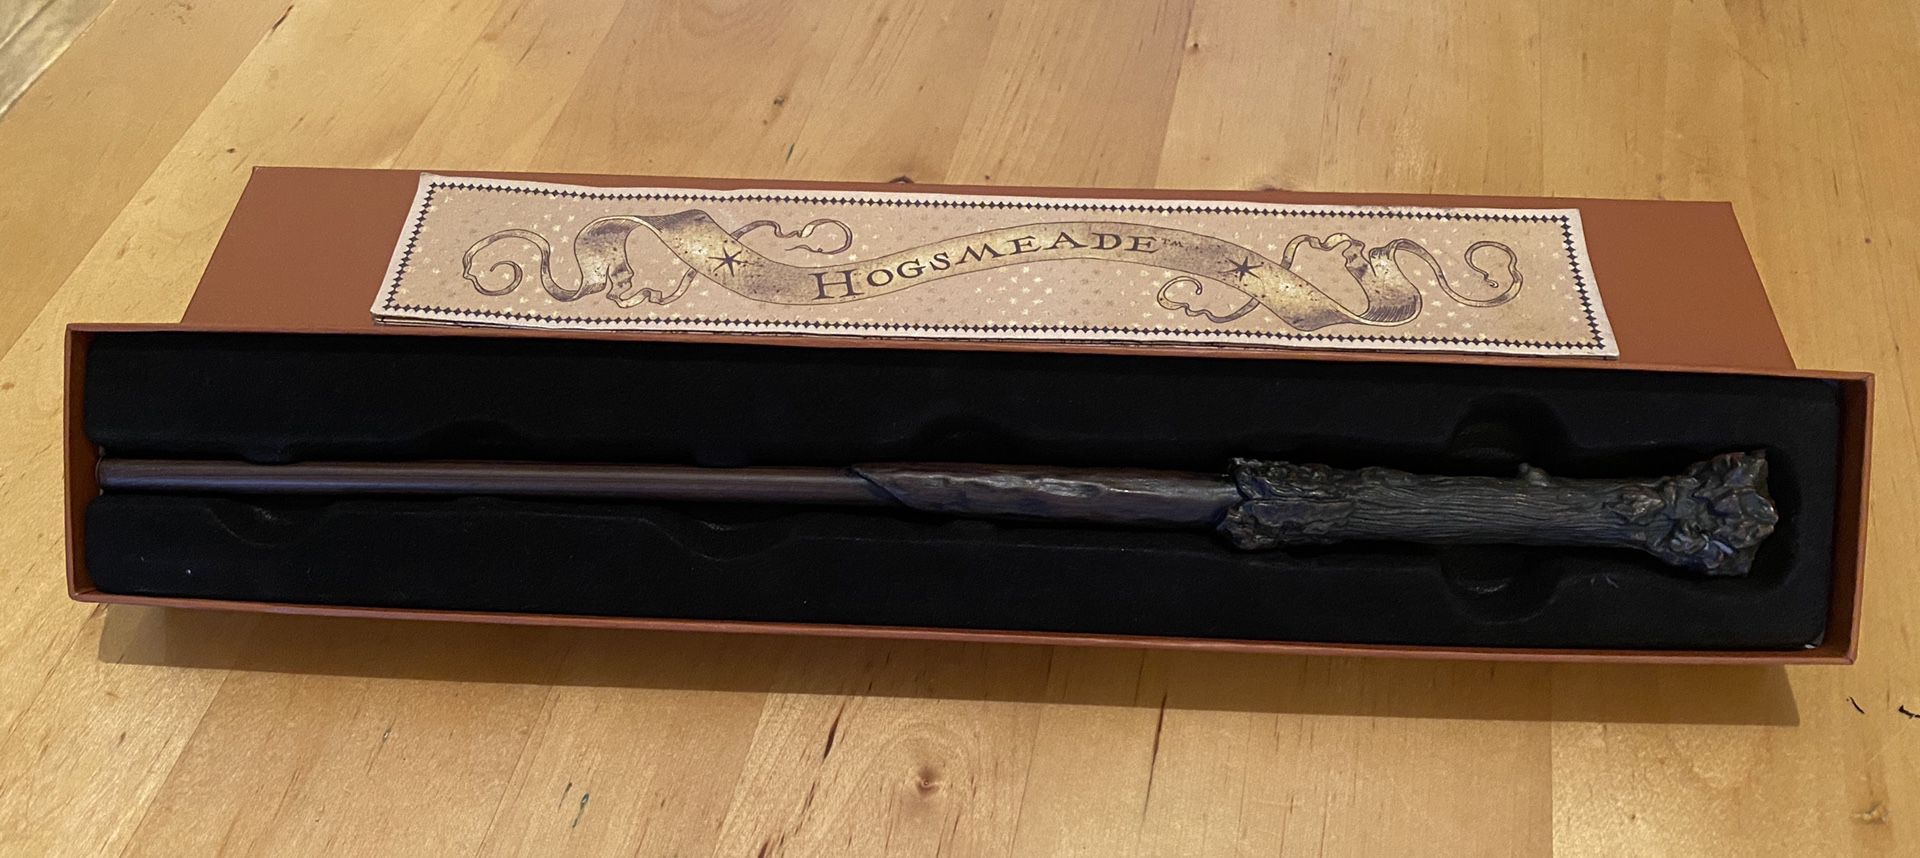 Harry Potter Interactive Wand for Universal Studios